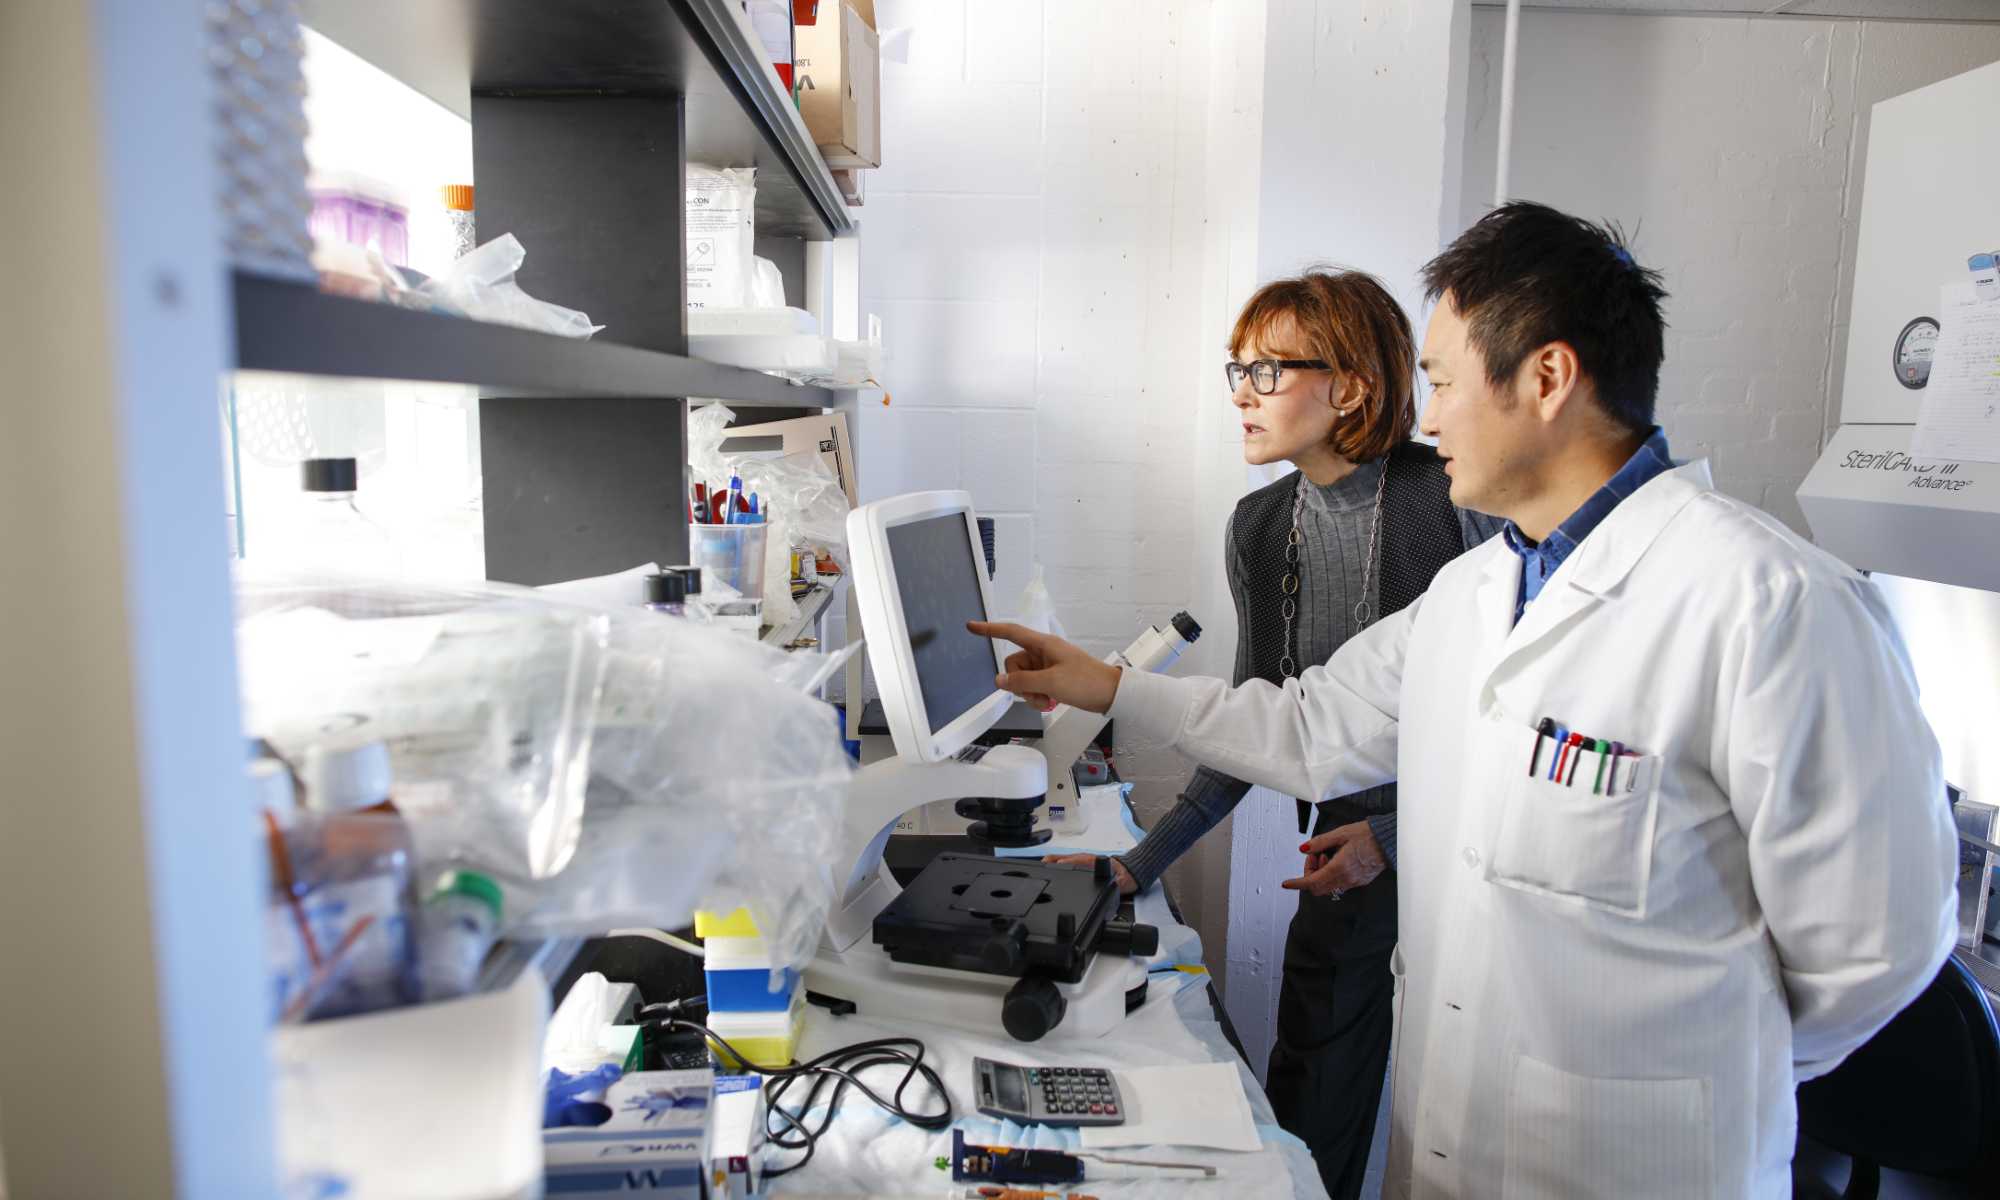 Two RNA research scientists in a lab analyzing the results of an experiment on a computer monitor.